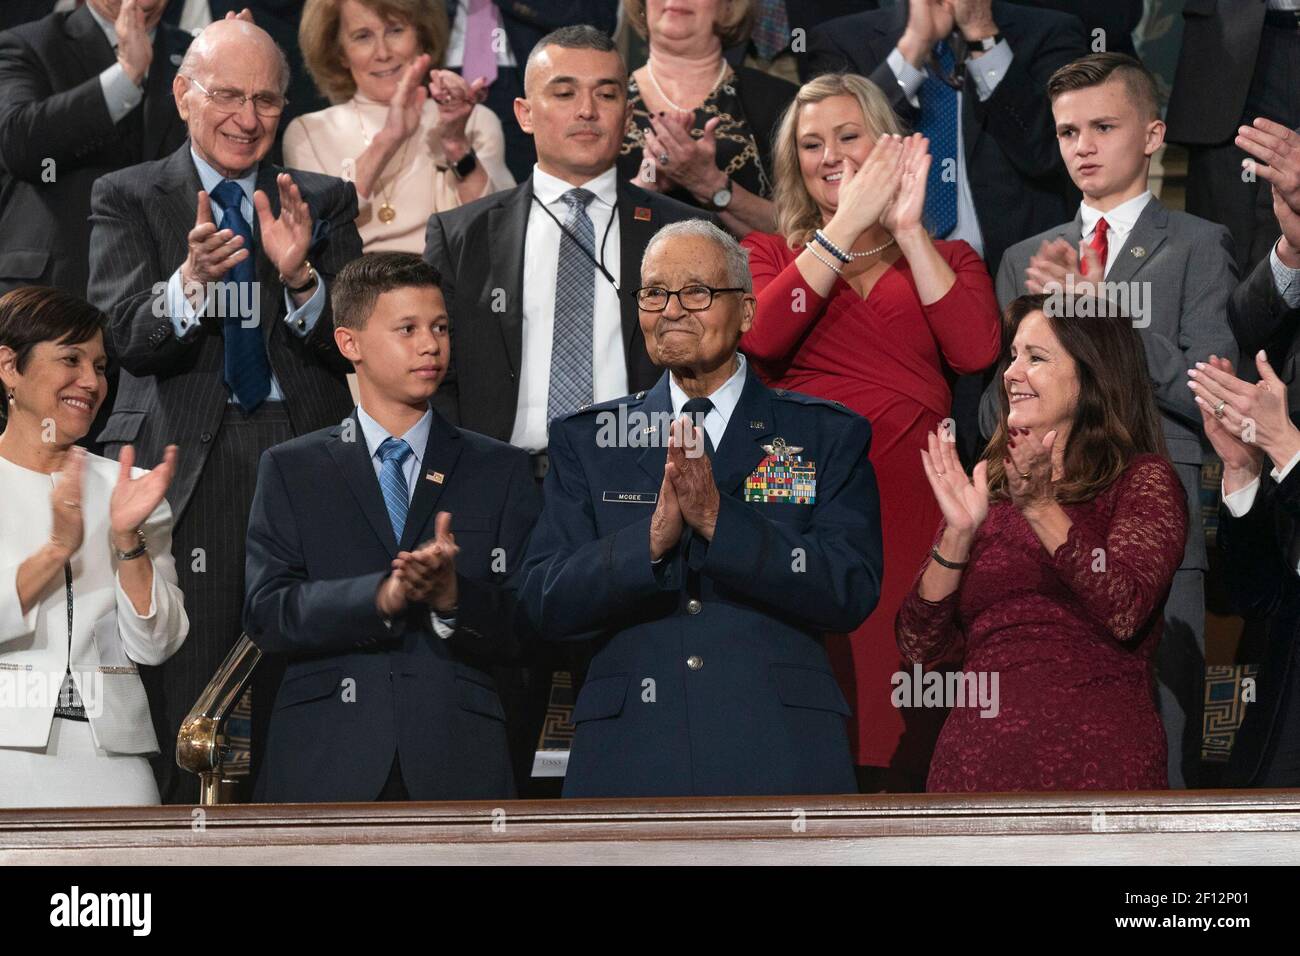 State of the Union Gallery guest 100-year-old retired Tuskegee Airman Brigadier General Charles McGee of Bethesda Md. joined by his grandson Iain Lanphier is applauded by Second Lady Mrs. Karen Pence as heâ€™s introduced by President Donald Trump Tuesday Feb. 4 2020 during the State of the Union address at the U.S. Capitol in Washington D.C. Stock Photo